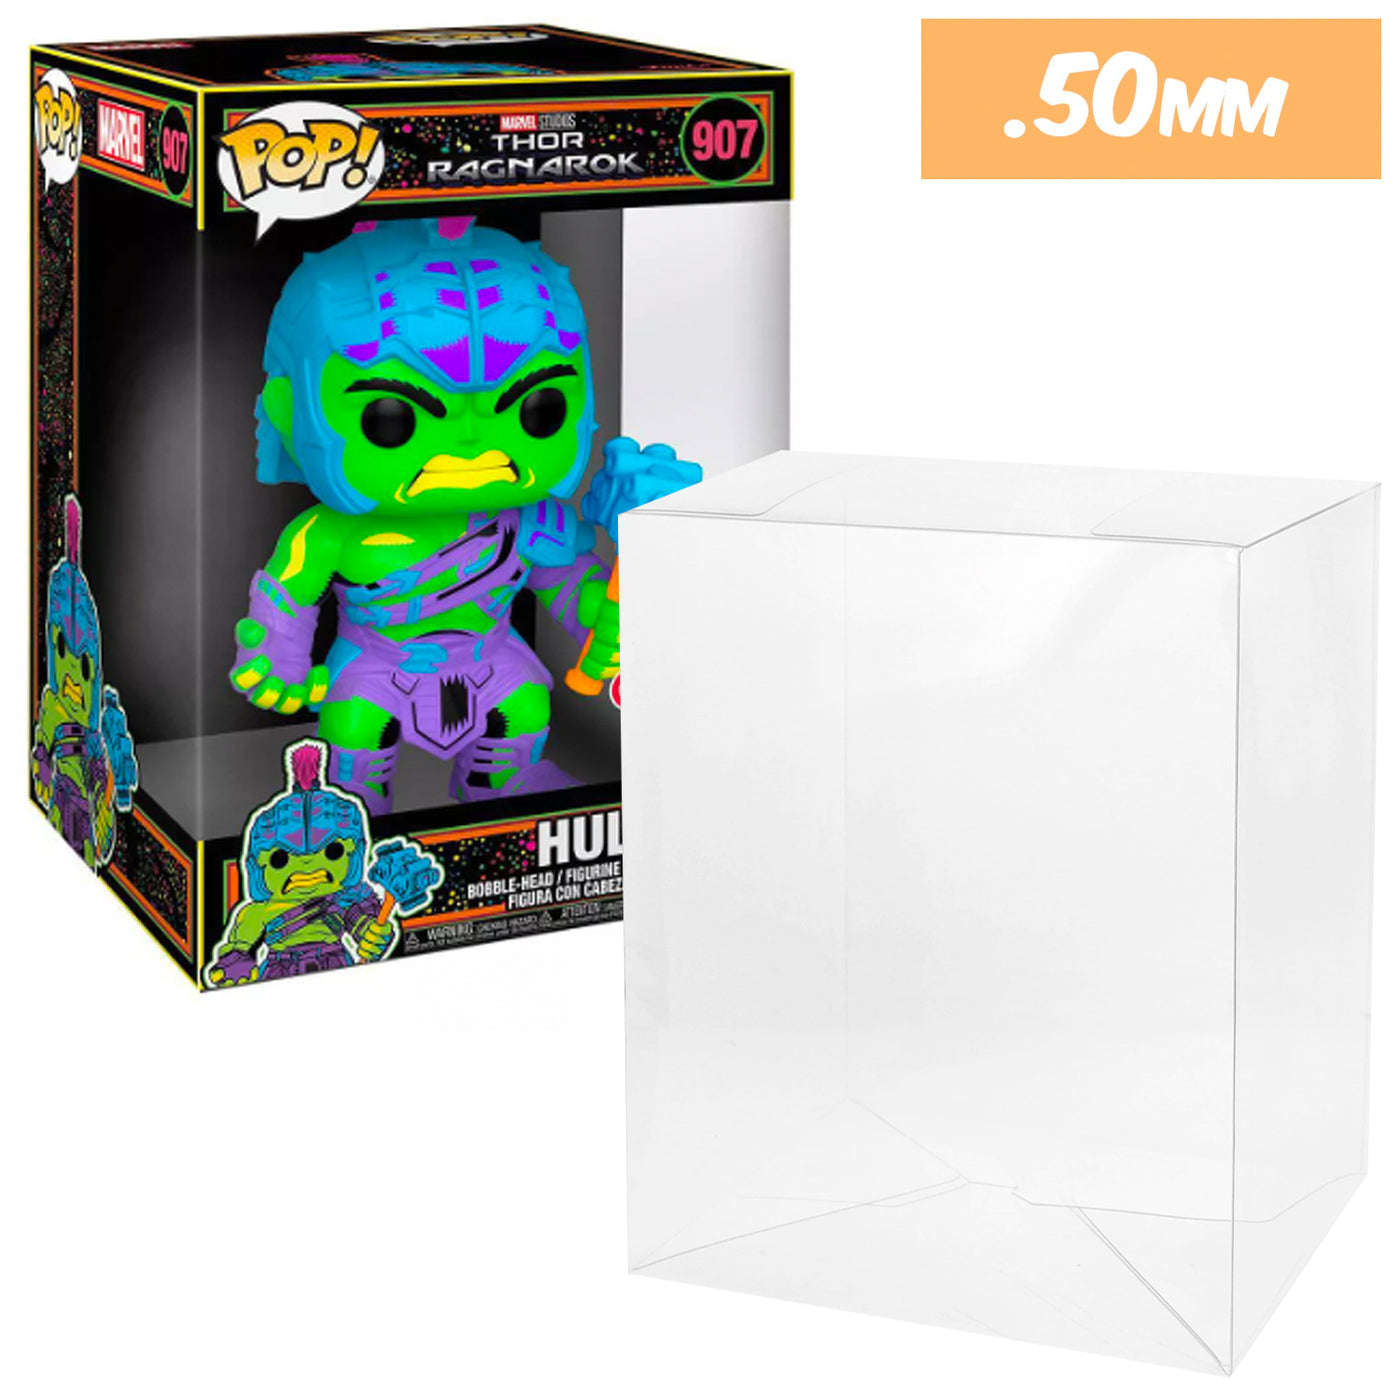 blacklight hulk 10 inch best funko pop protectors thick strong uv scratch flat top stack vinyl display geek plastic shield vaulted eco armor fits collect protect display case kollector protector